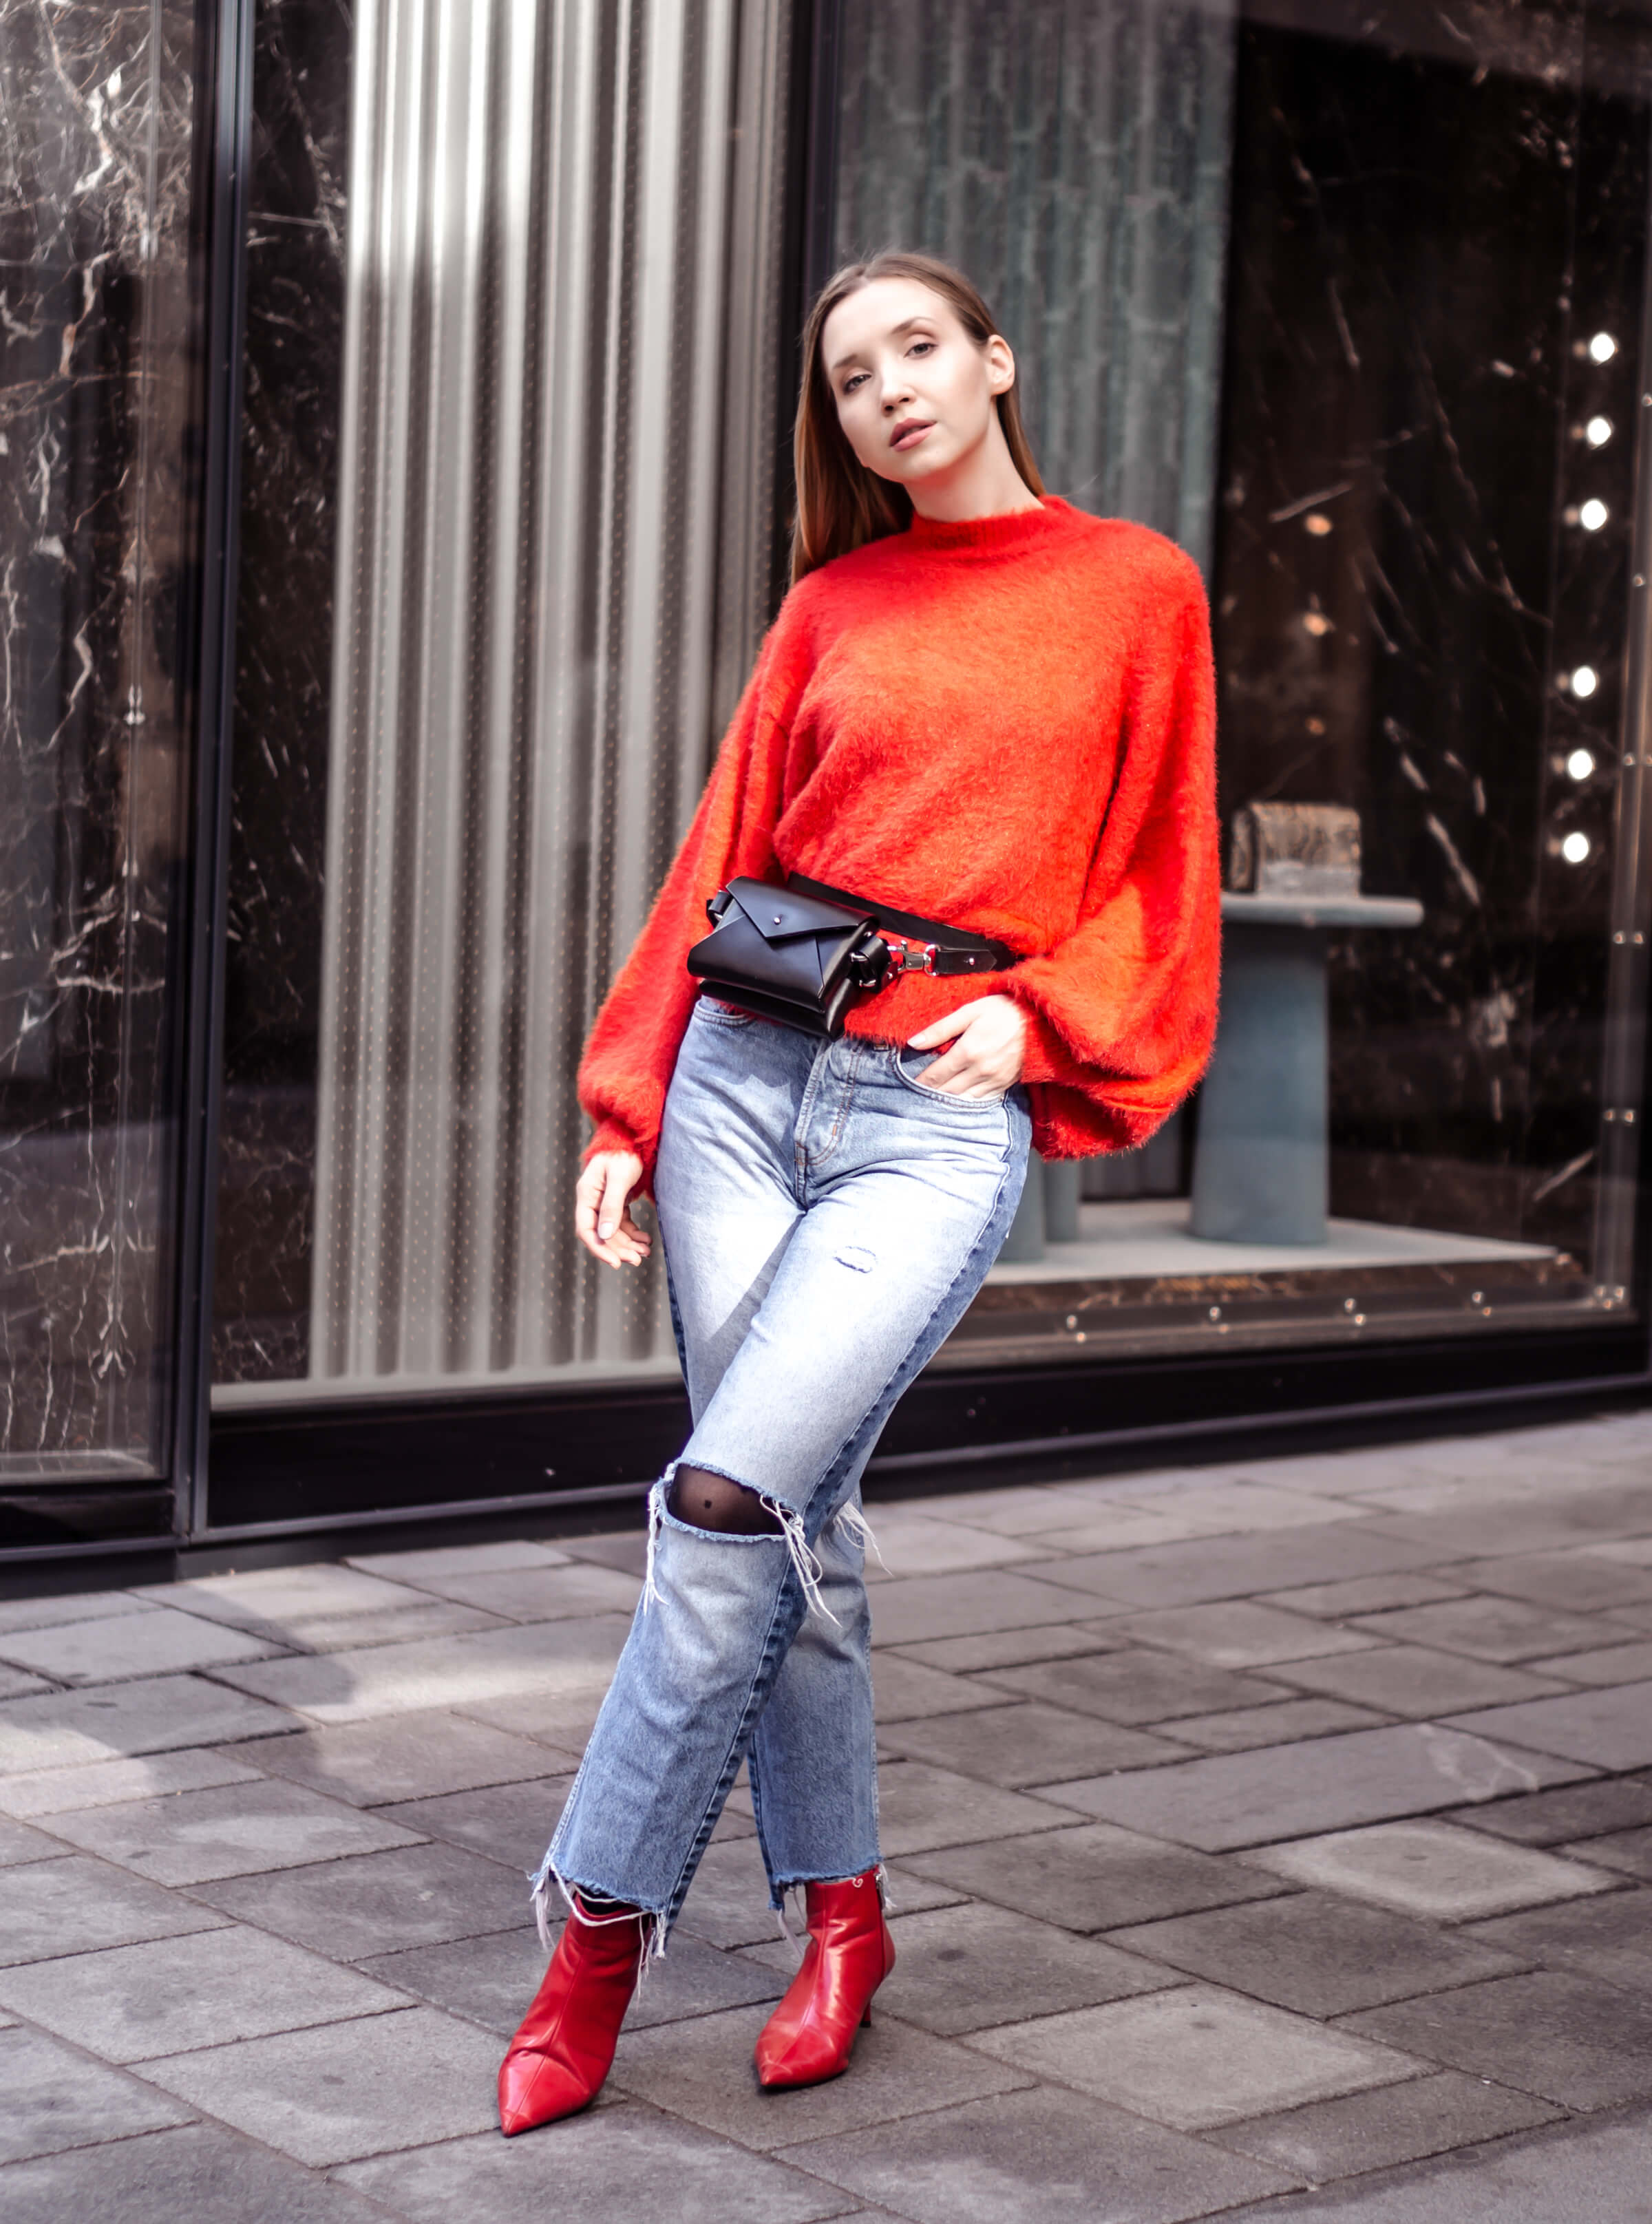 How to Wear Red (This Season's Hottest Trend) - The Trend Spotter